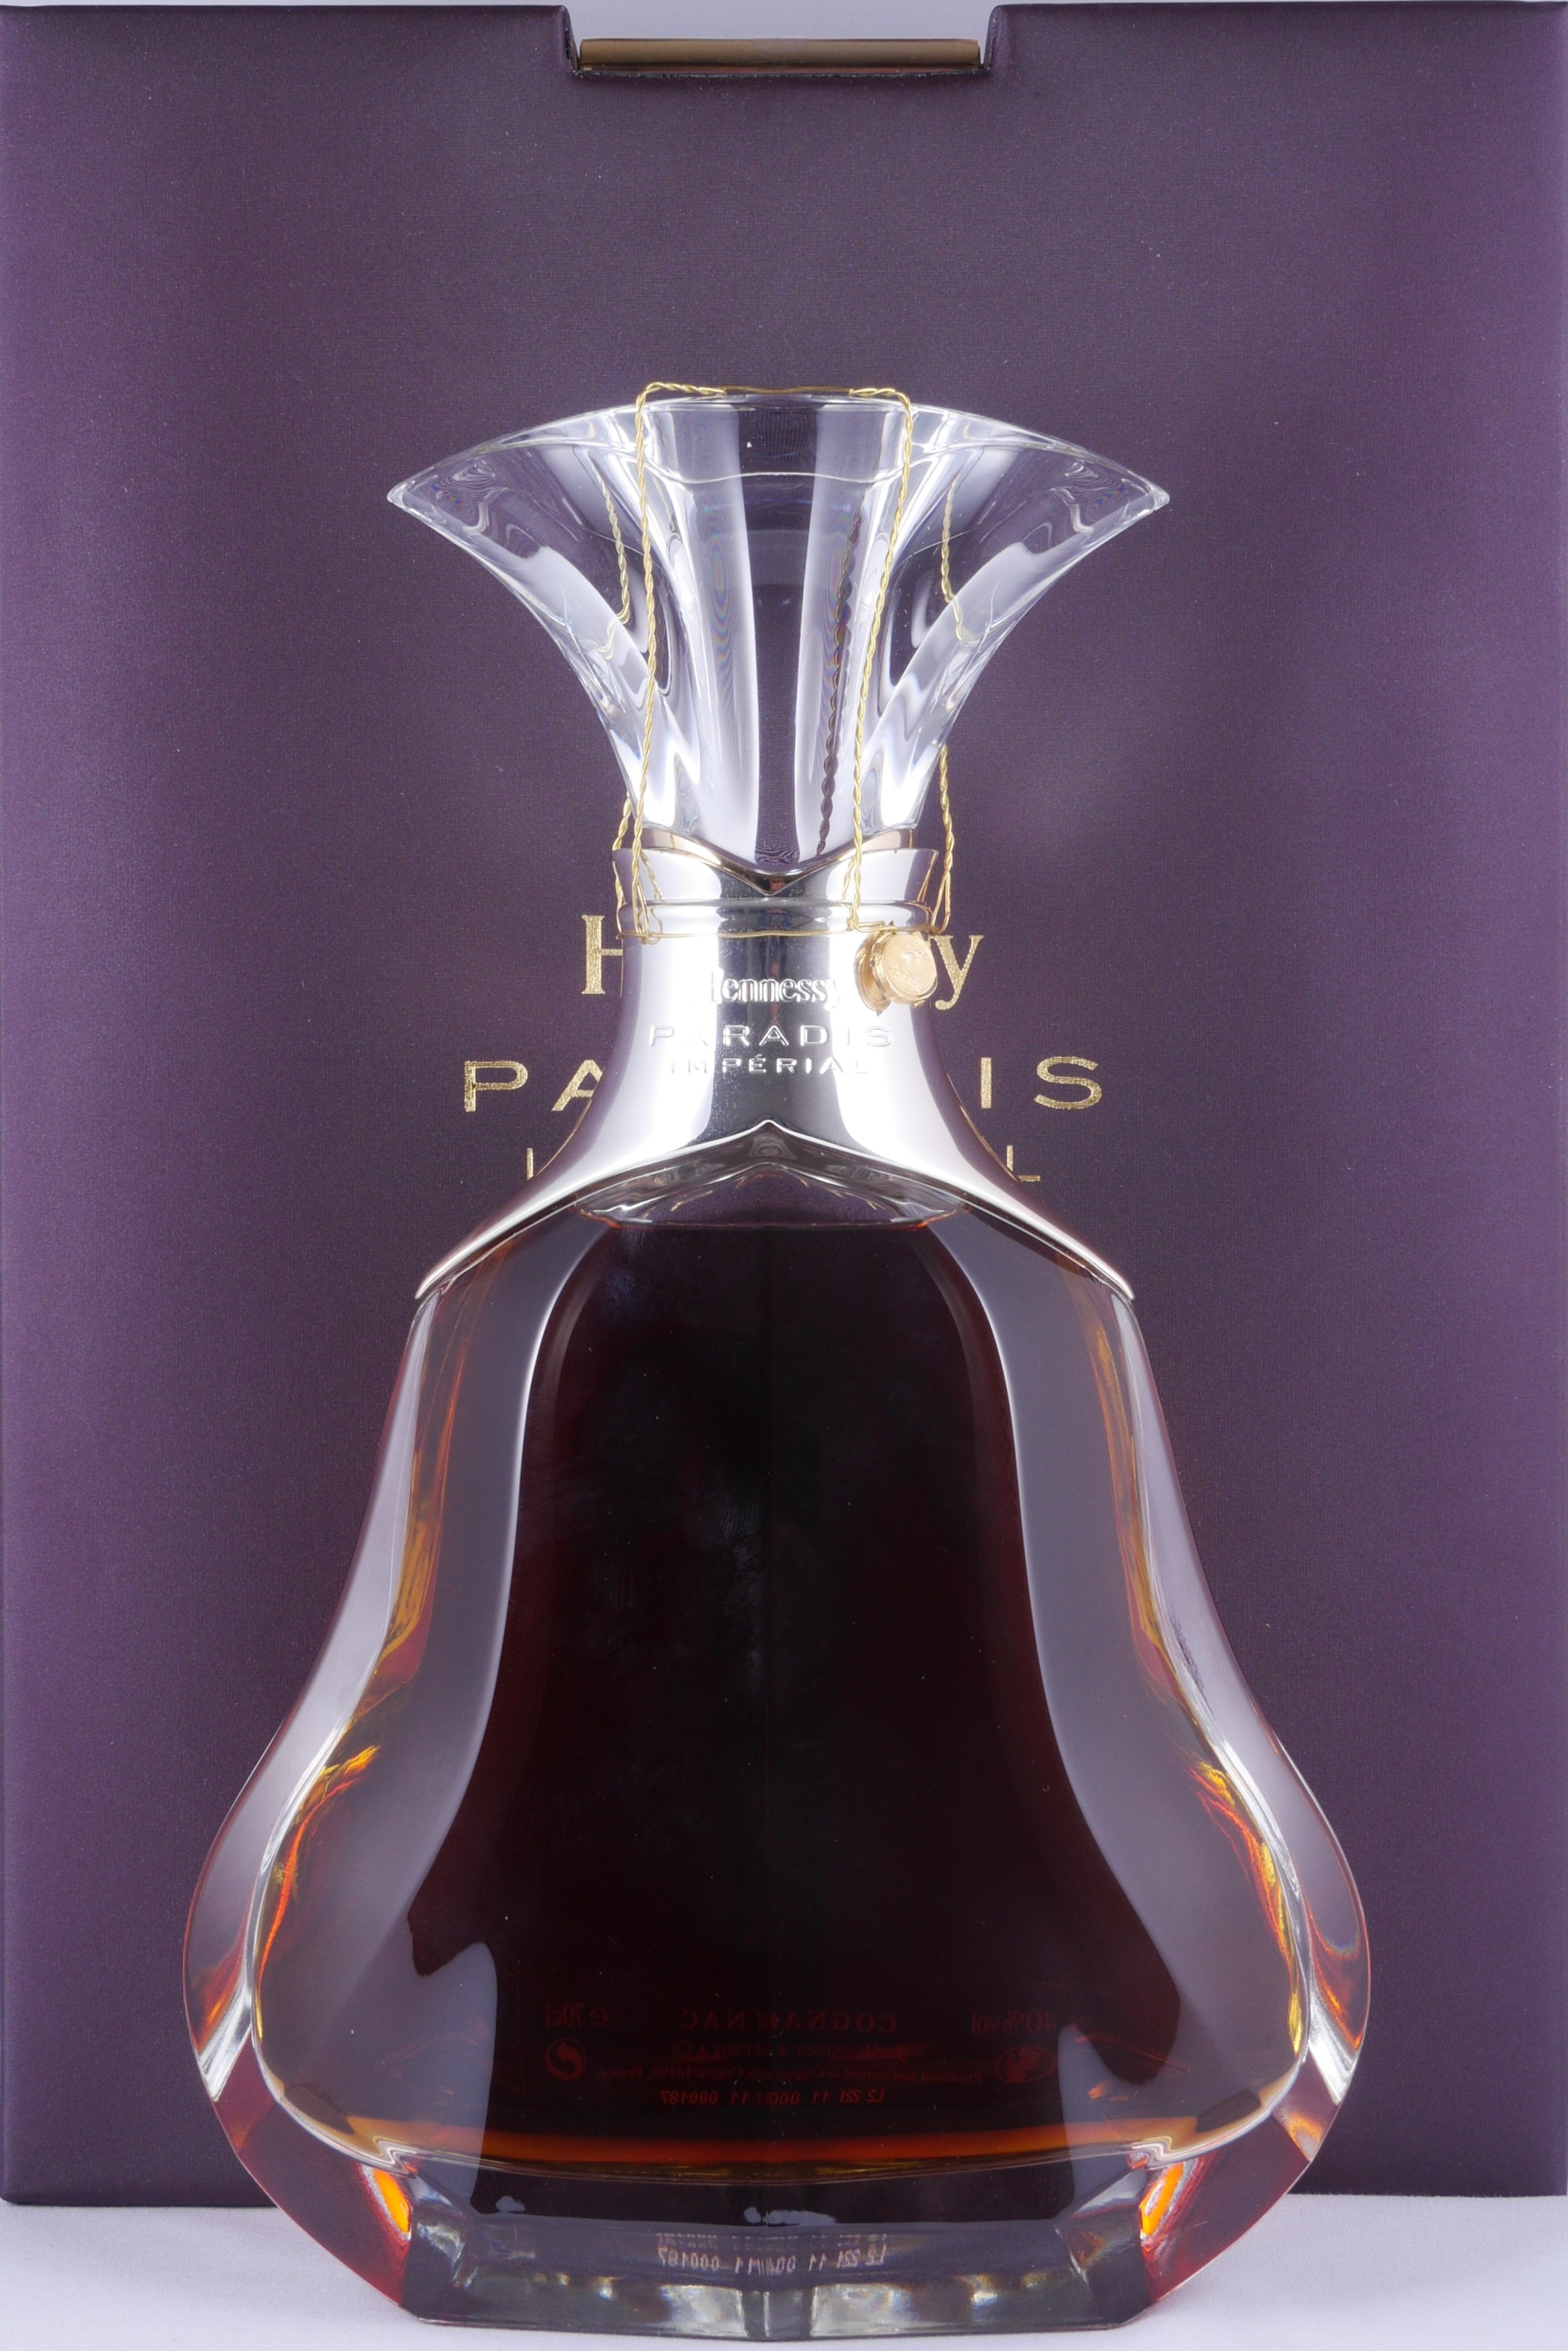 Hennessy Paradis Imperial Cognac - Buy Online at